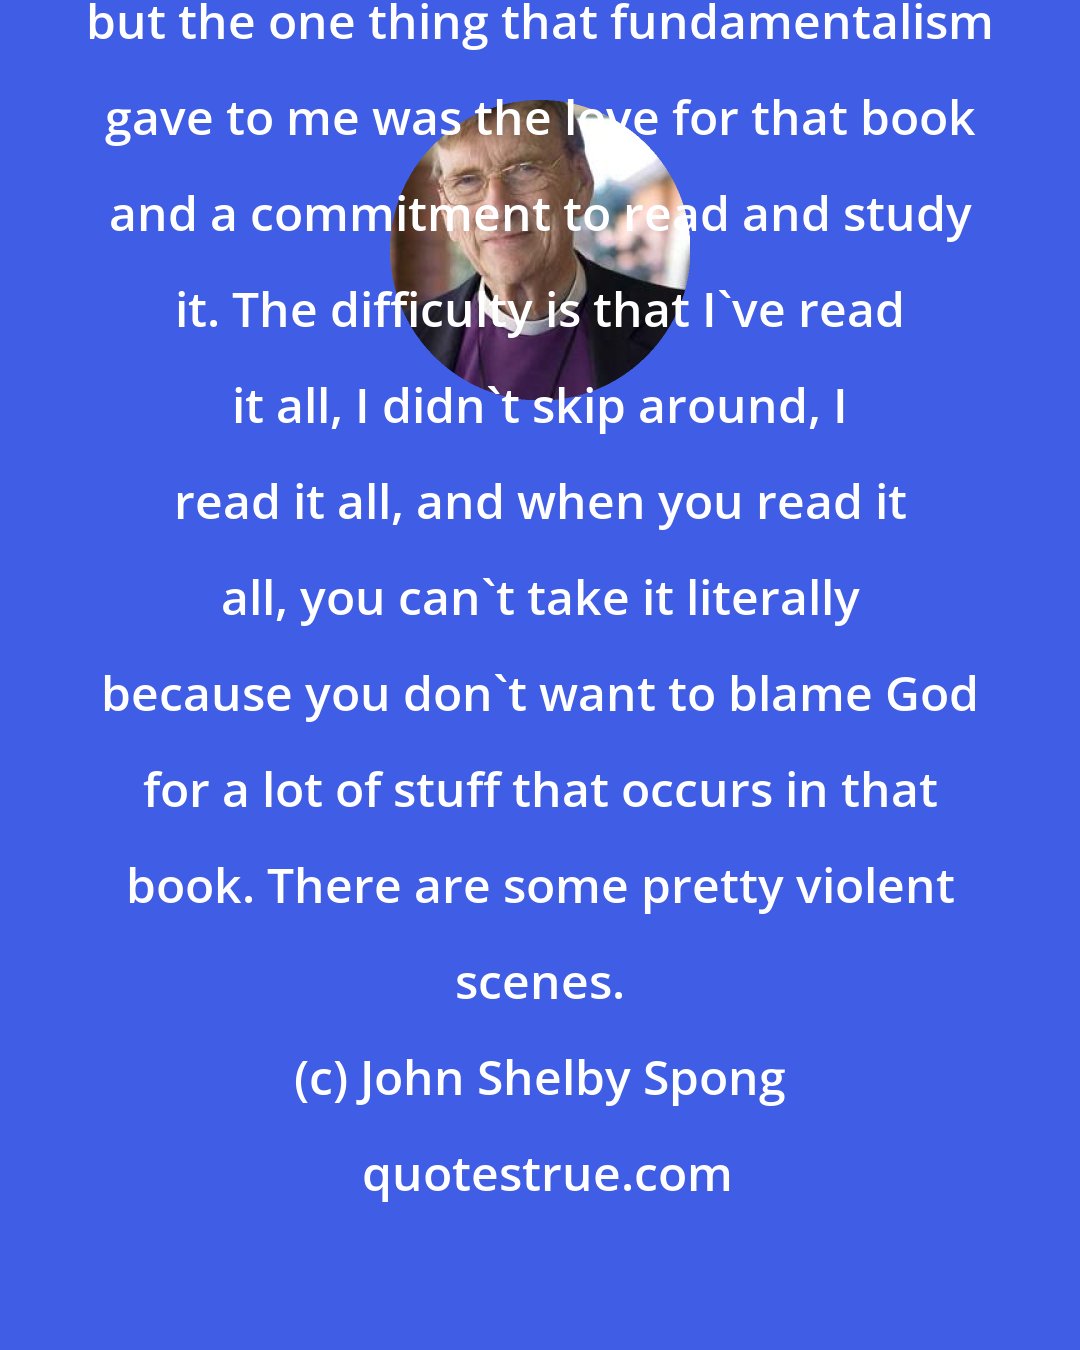 John Shelby Spong: I was raised pretty much a fundamentalist, but the one thing that fundamentalism gave to me was the love for that book and a commitment to read and study it. The difficulty is that I've read it all, I didn't skip around, I read it all, and when you read it all, you can't take it literally because you don't want to blame God for a lot of stuff that occurs in that book. There are some pretty violent scenes.